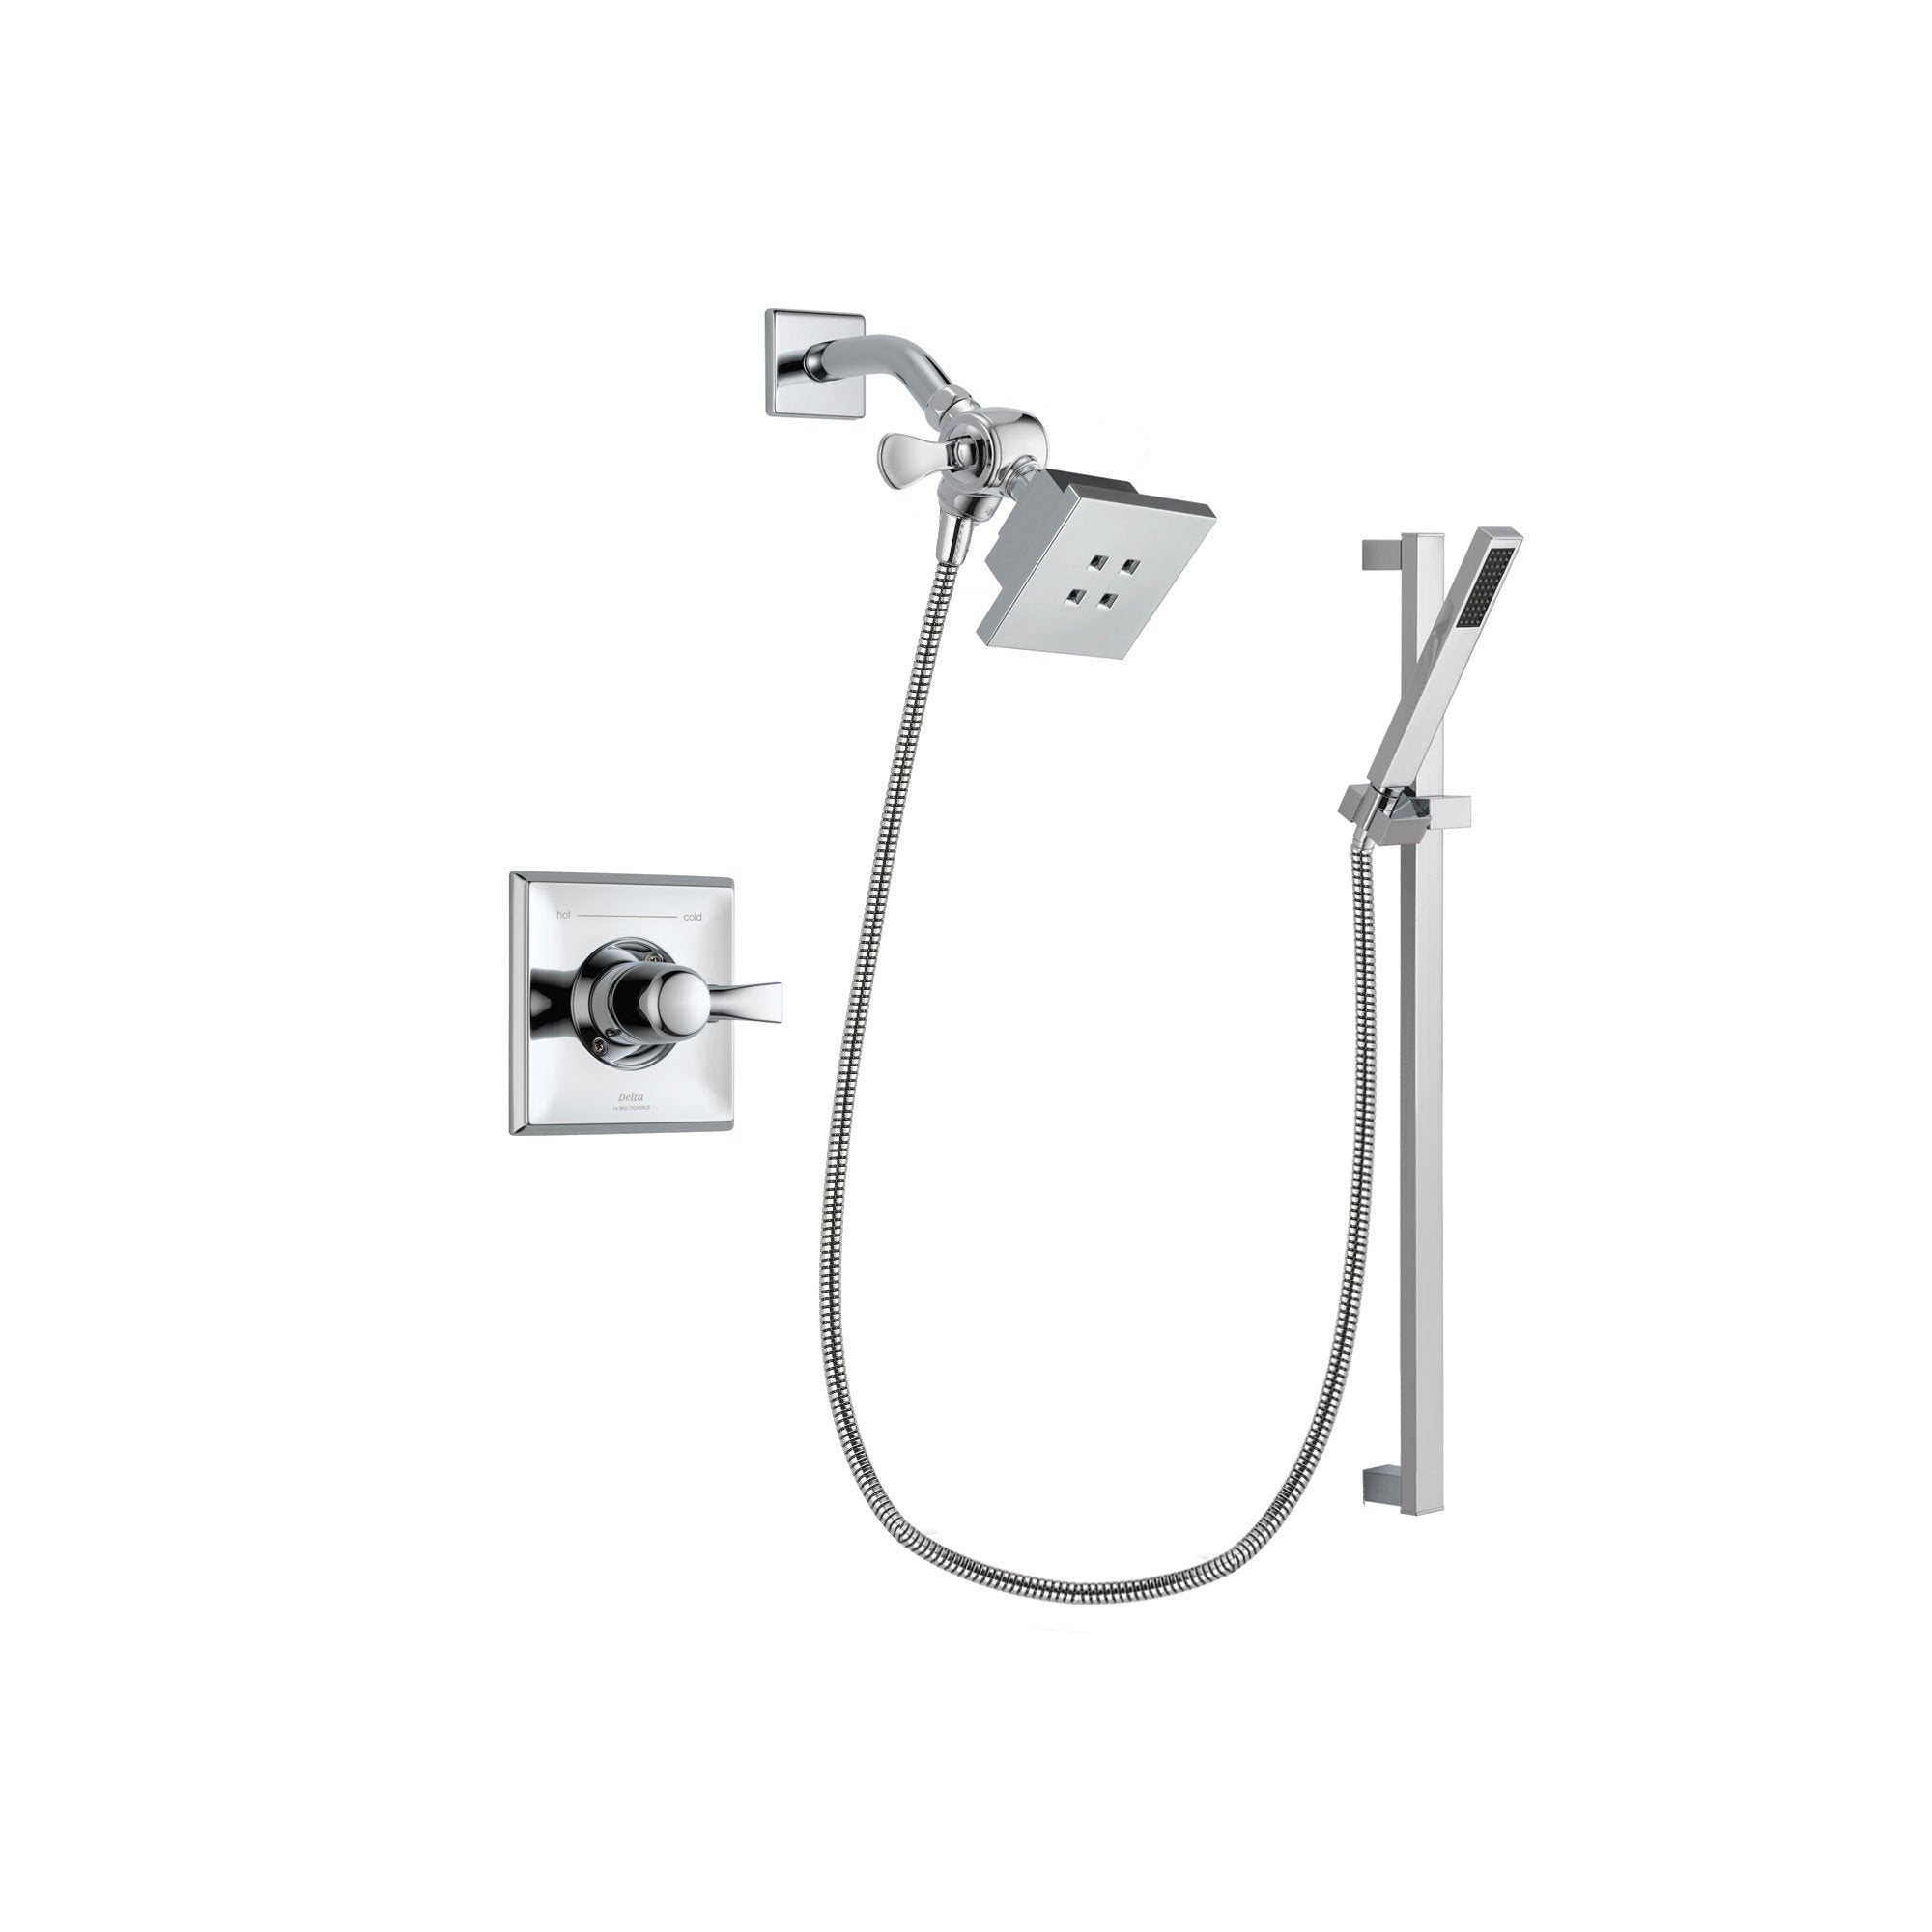 Delta Dryden Chrome Finish Shower Faucet System Package with Square Showerhead and Modern Square Wall Mount Slide Bar with Handheld Shower Spray Includes Rough-in Valve DSP0200V